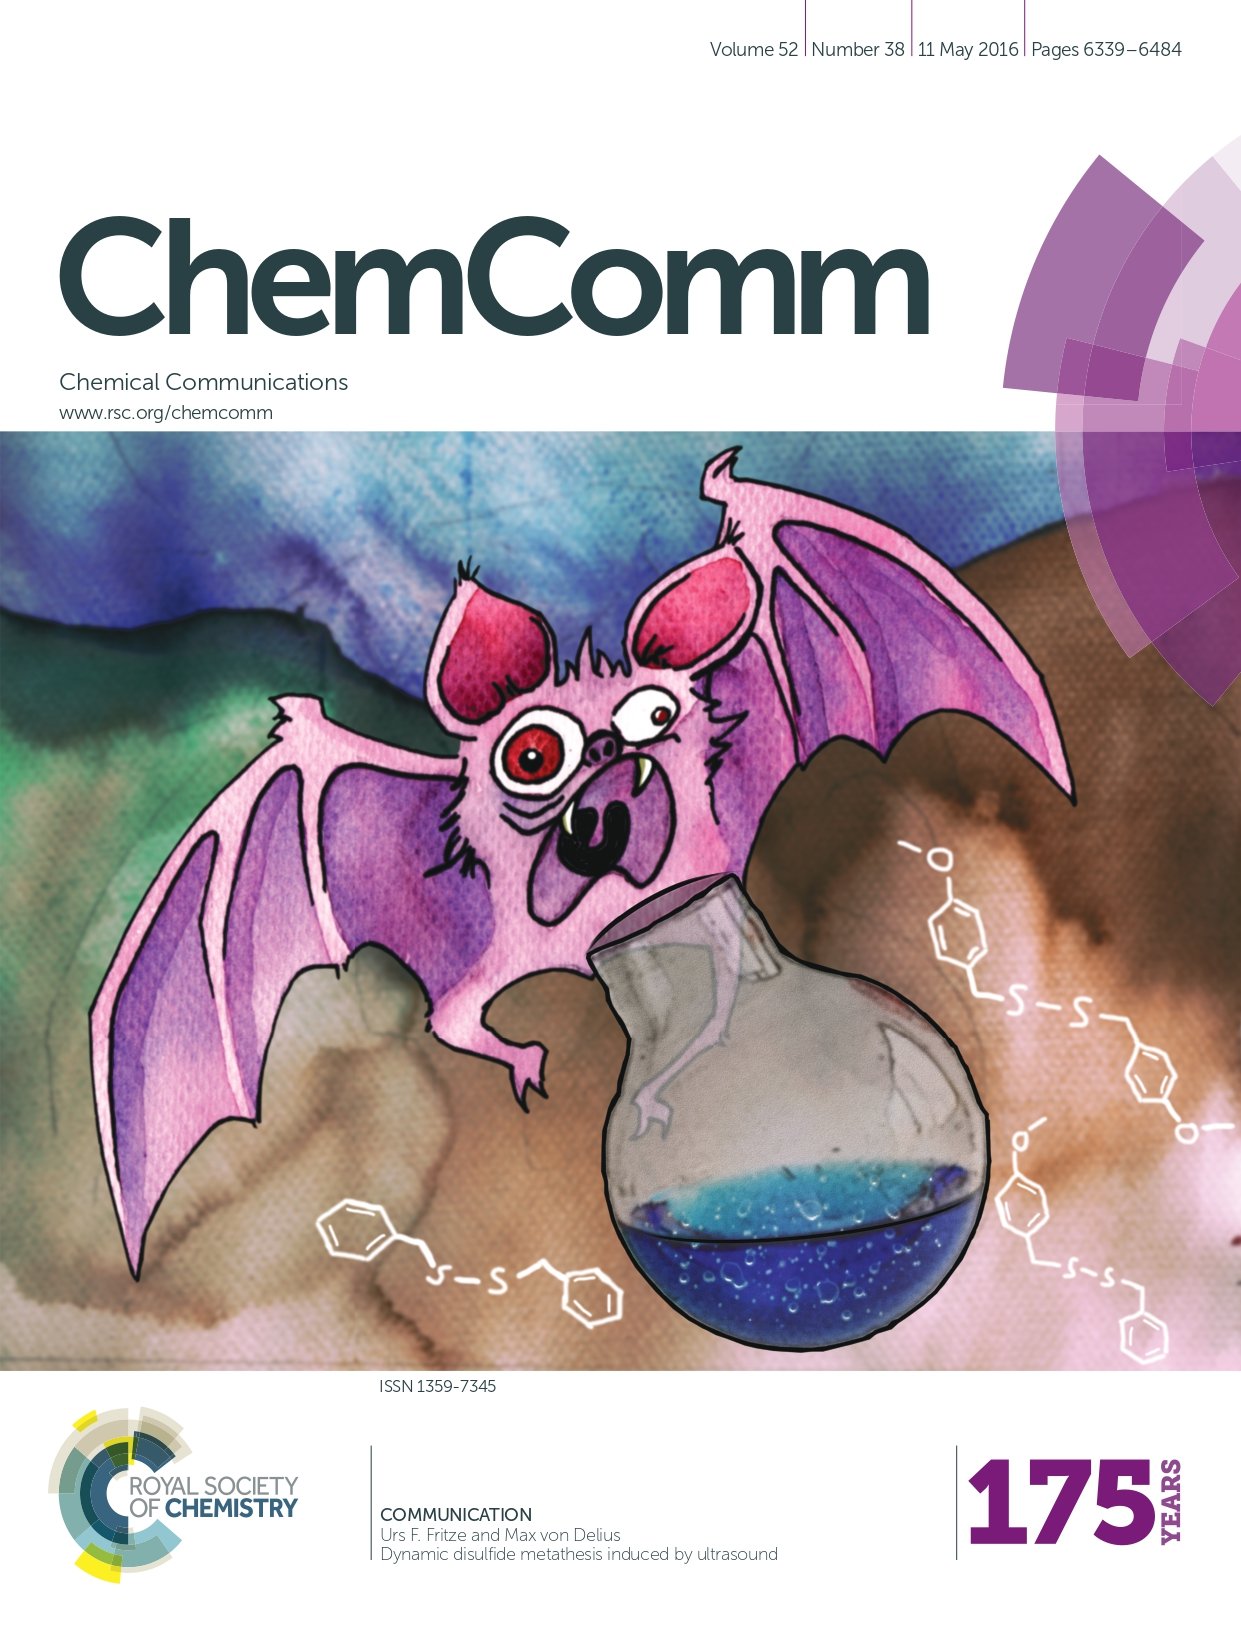 cover of journal Chemical Communications volume 52